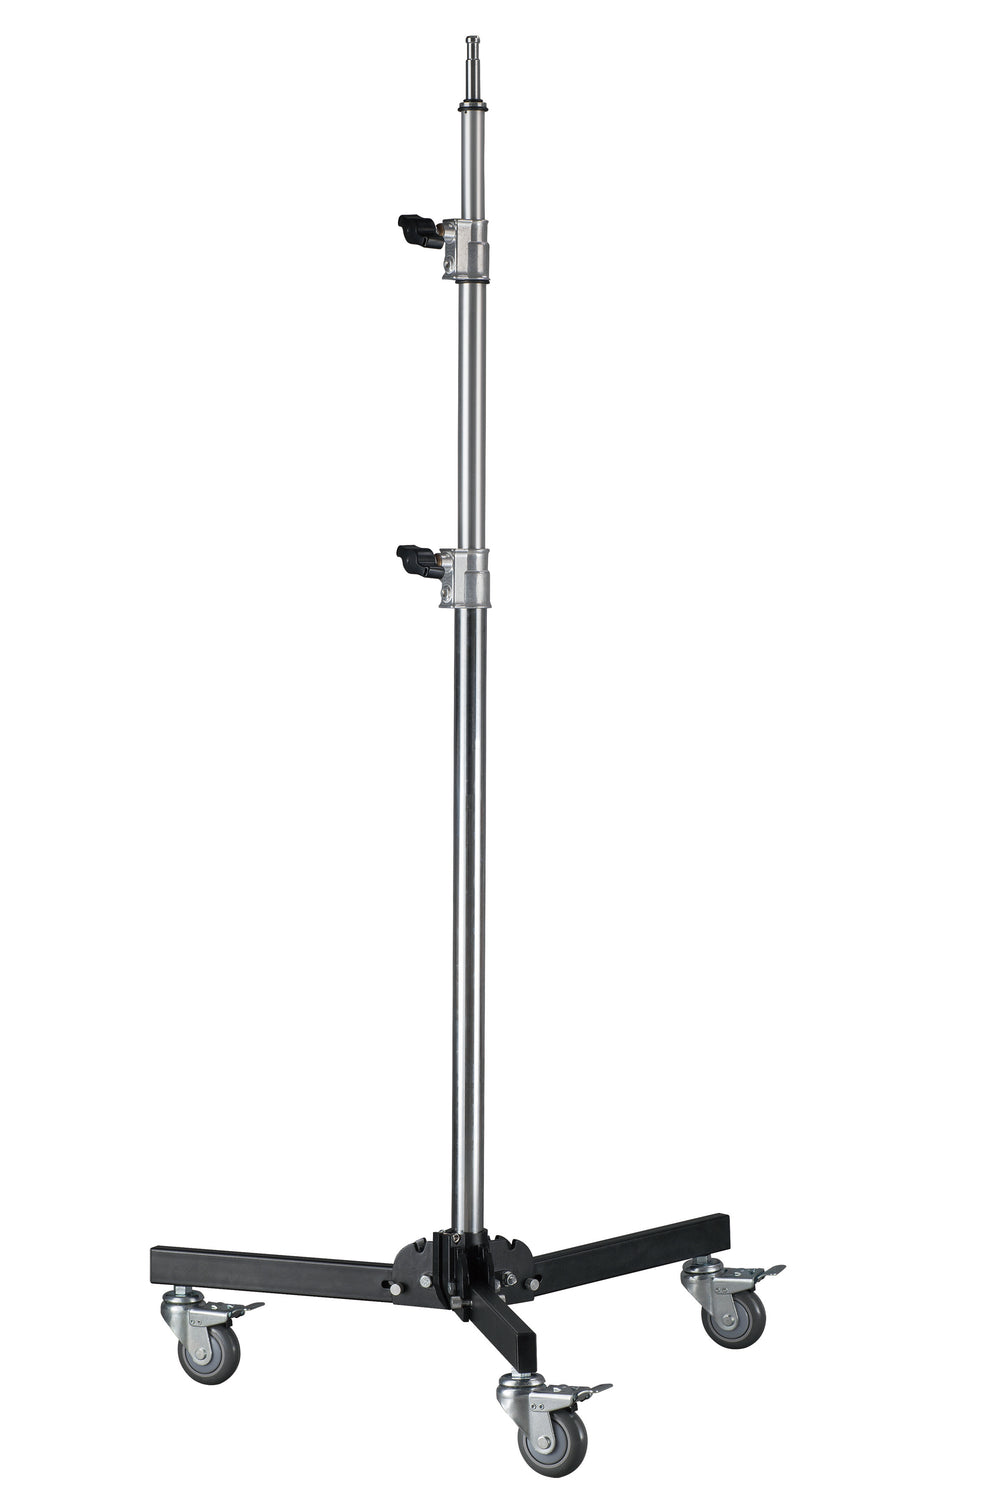 Lumia Heavy duty stand with Roller Base 6860 (Similar to Avenger)